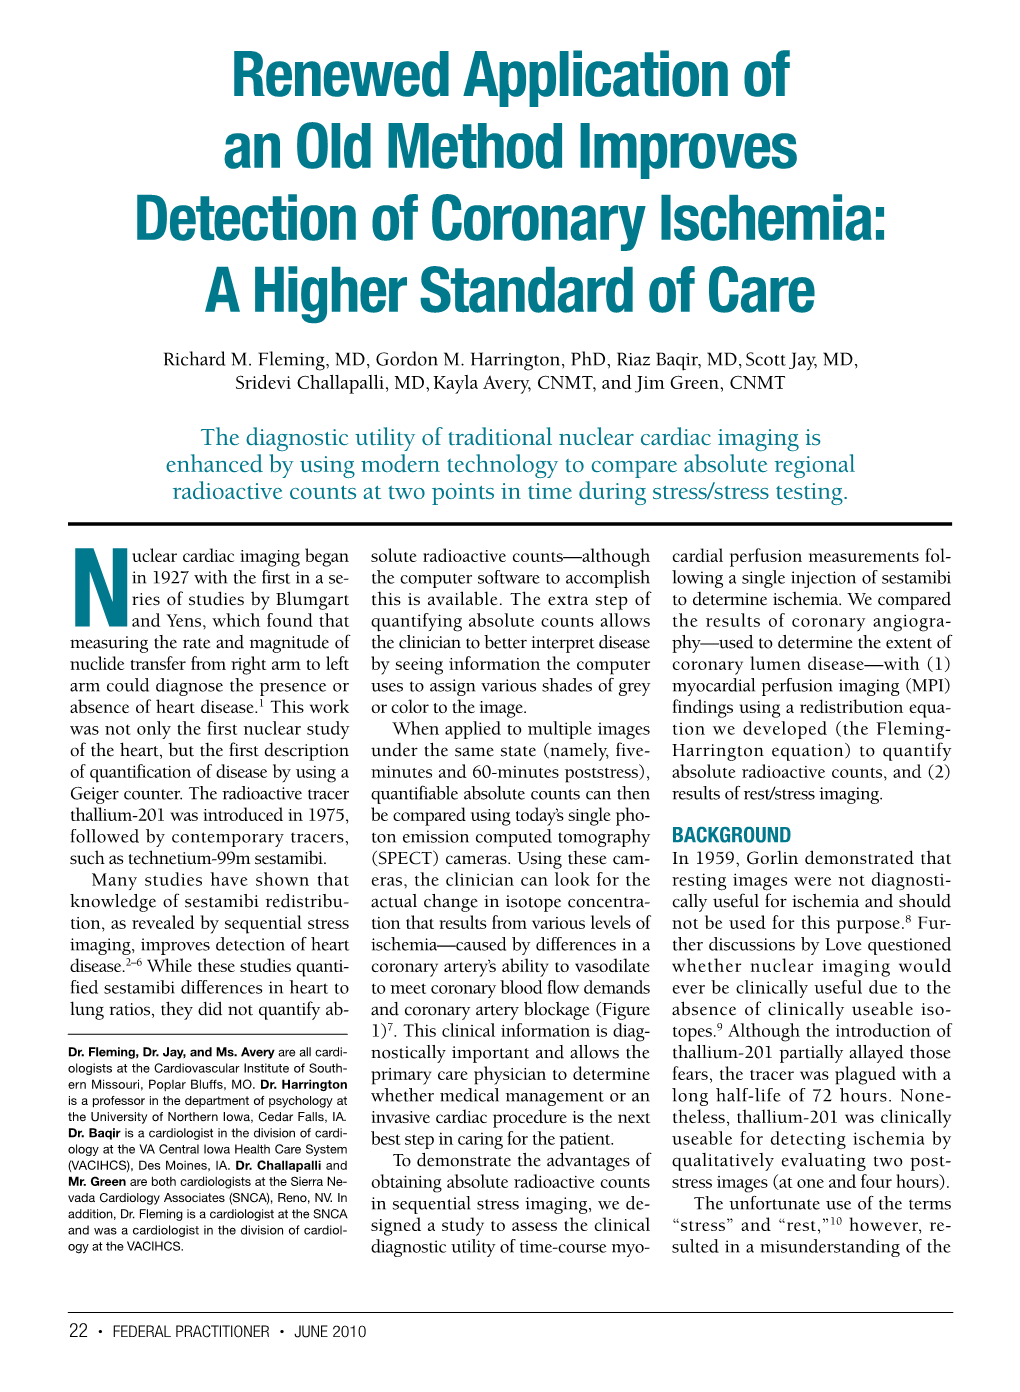 Renewed Application of an Old Method Improves Detection of Coronary Ischemia: a Higher Standard of Care